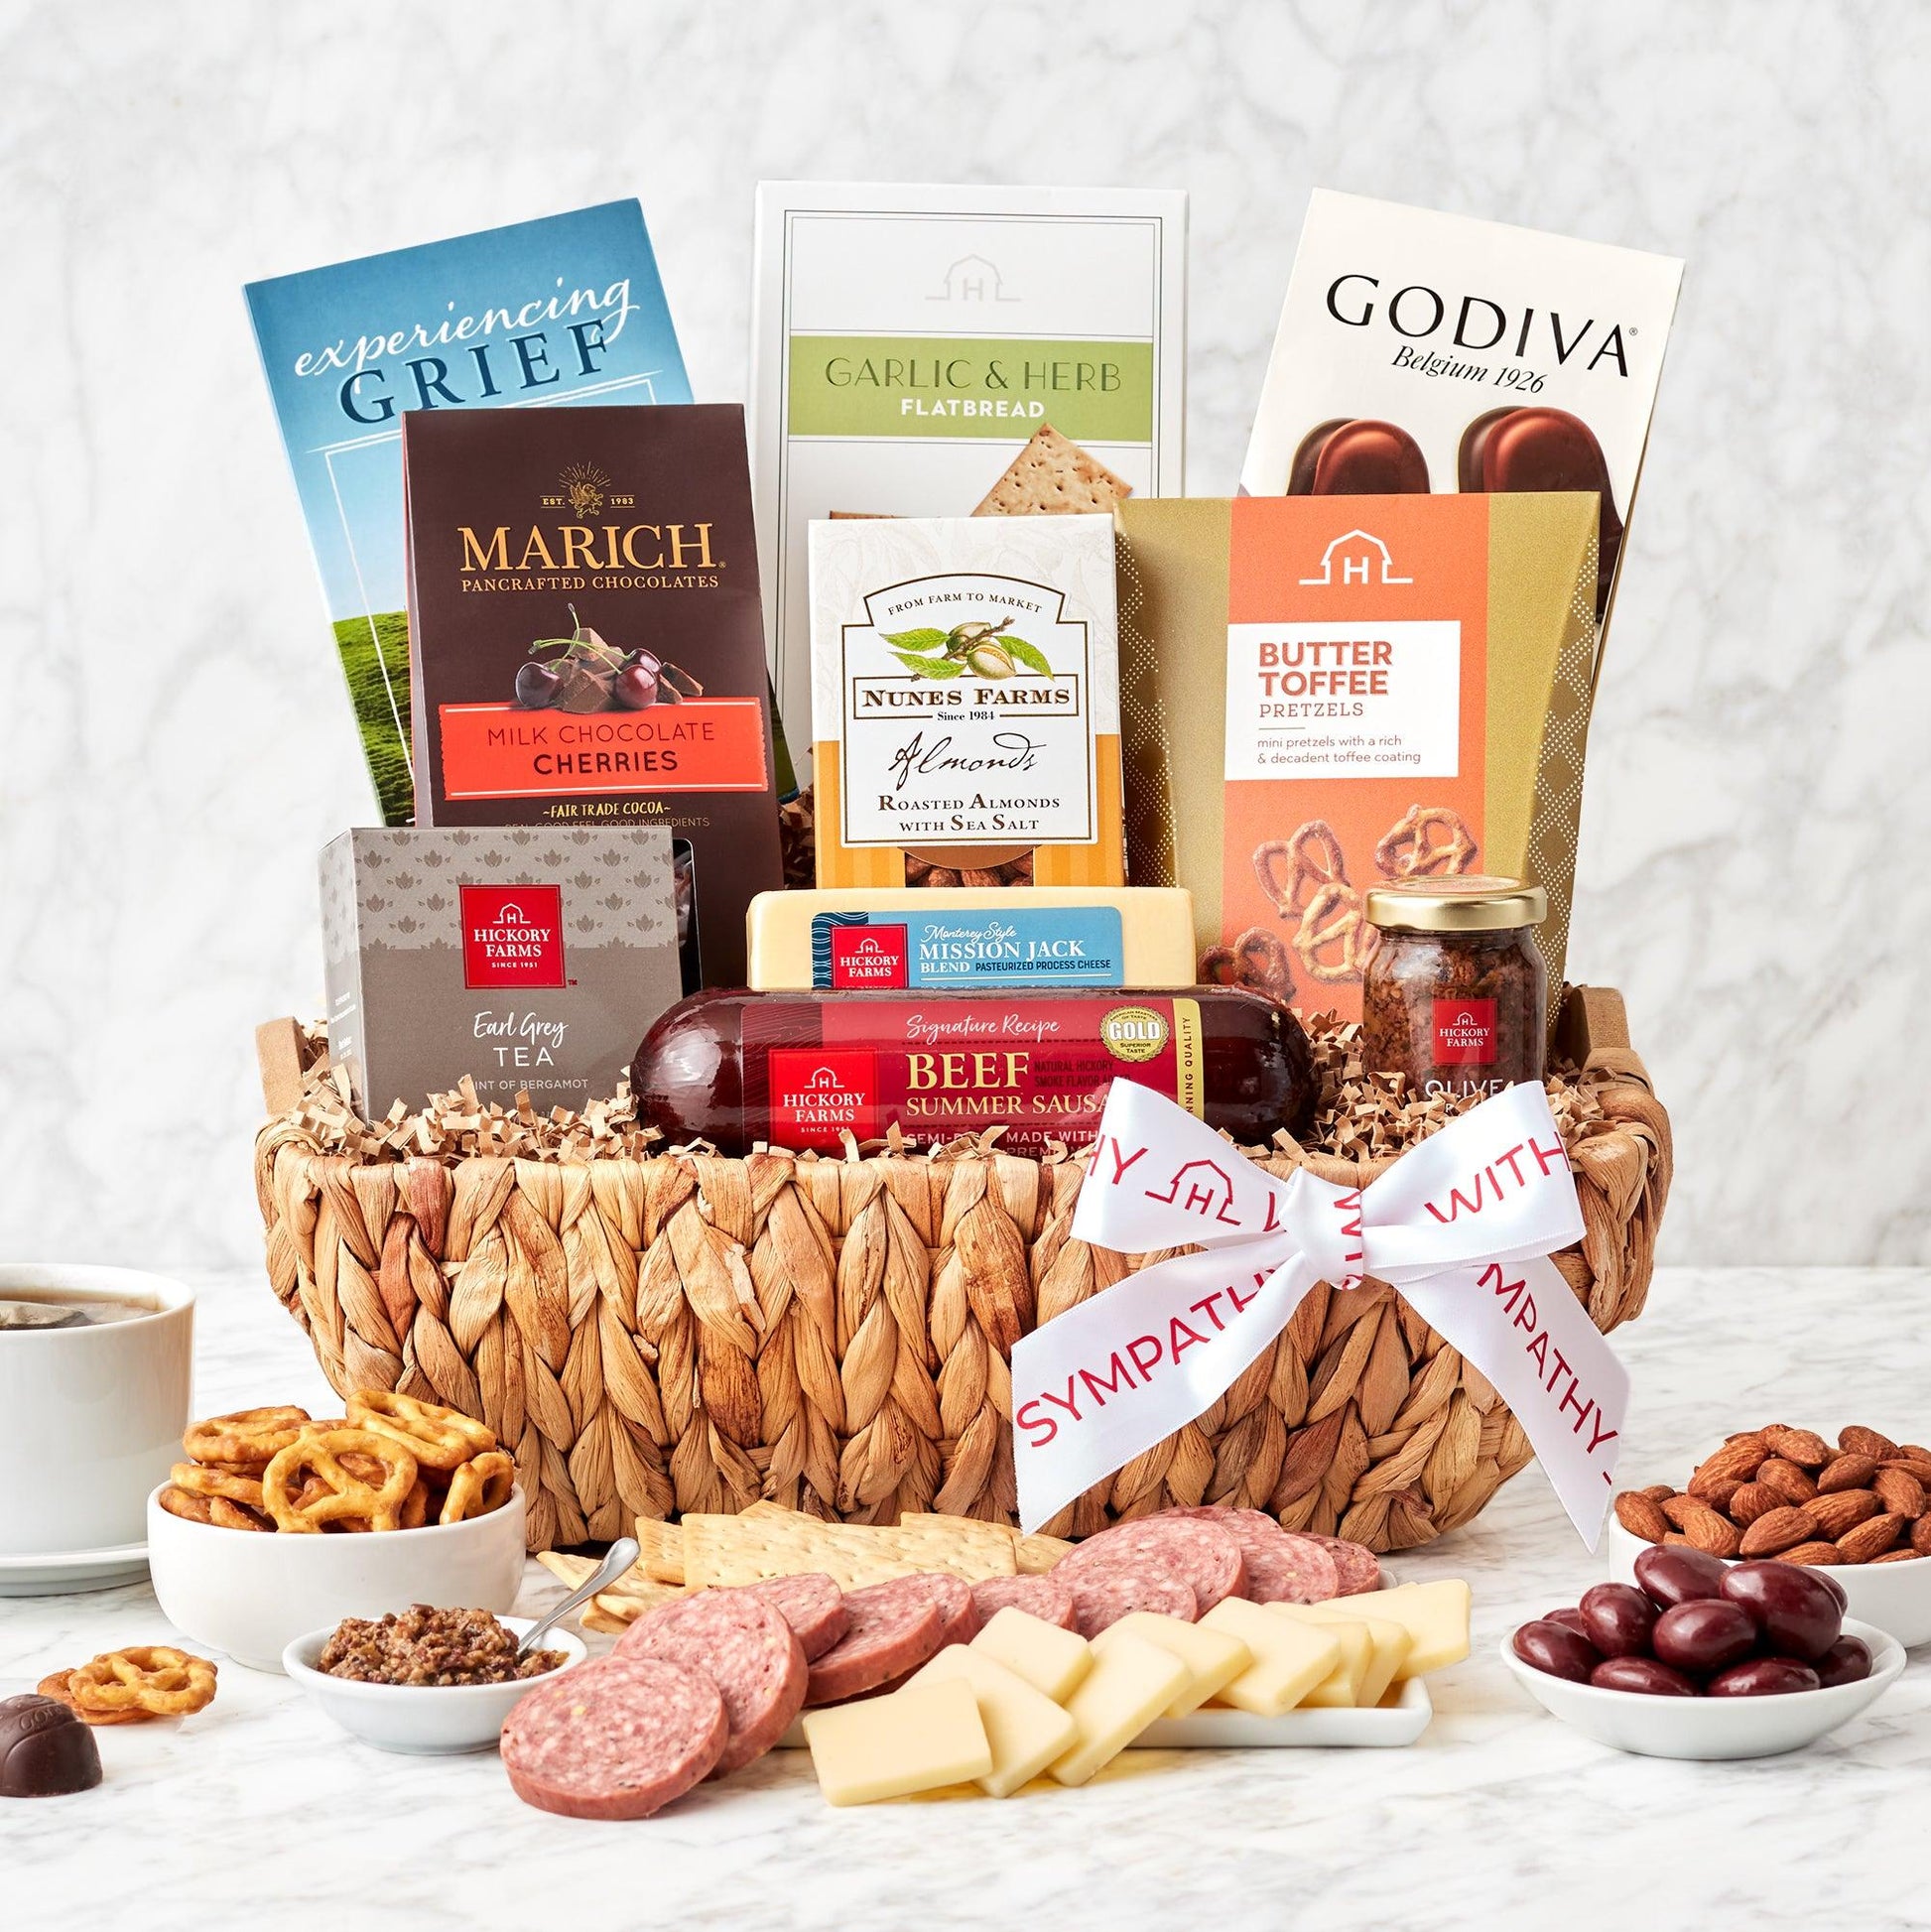 Thoughtful Sympathies Savory Gift Basket - Send a collection of sweet and savory treats to show support to someone going through a tough time. Well-loved flavors are paired deliciously with snacks, treats, and comforting tea. A book called Experiencing Grief adds a thoughtful touch to this gift basket.